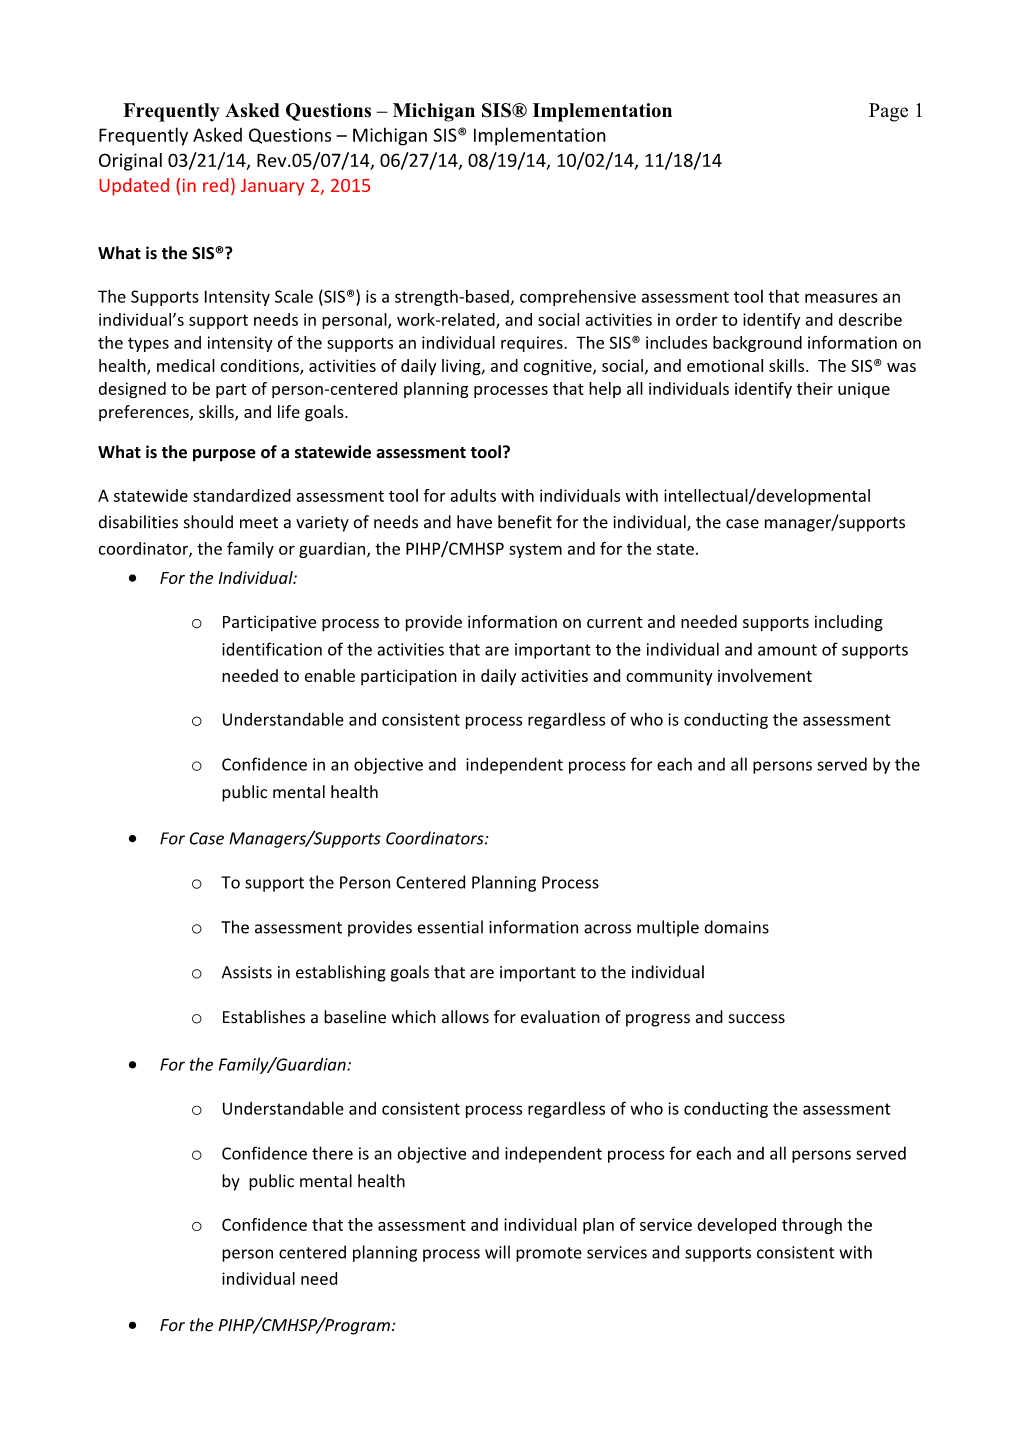 Frequently Asked Questions Michigan SIS Implementation Page 8